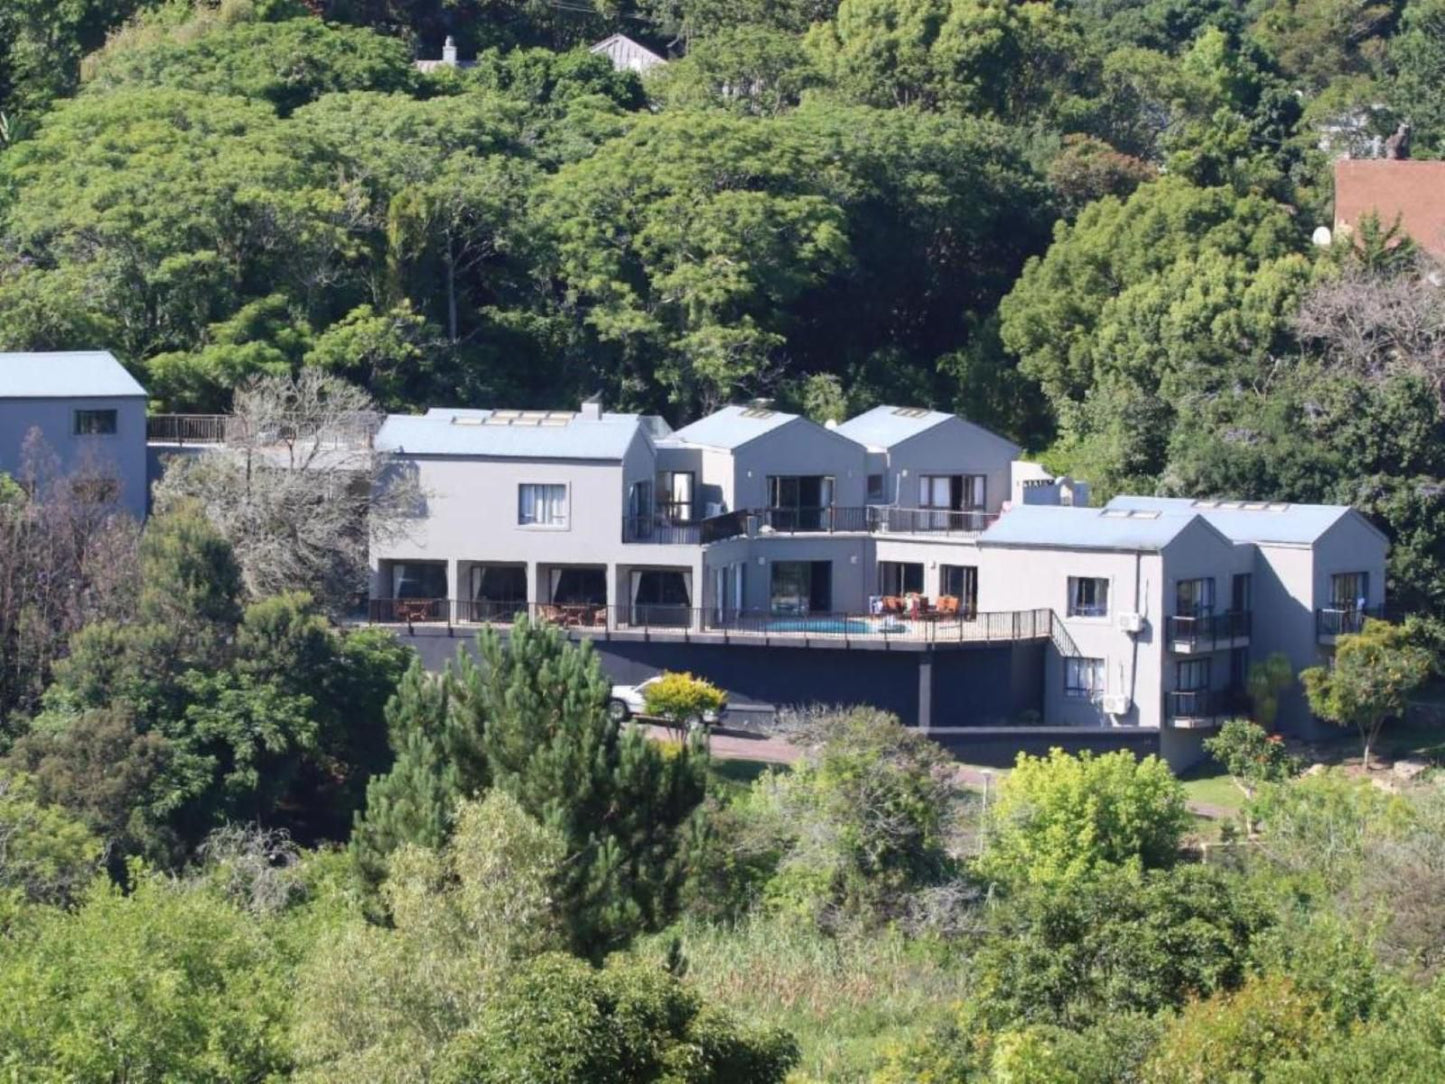 47Th On Howard Hunters Home Knysna Western Cape South Africa House, Building, Architecture